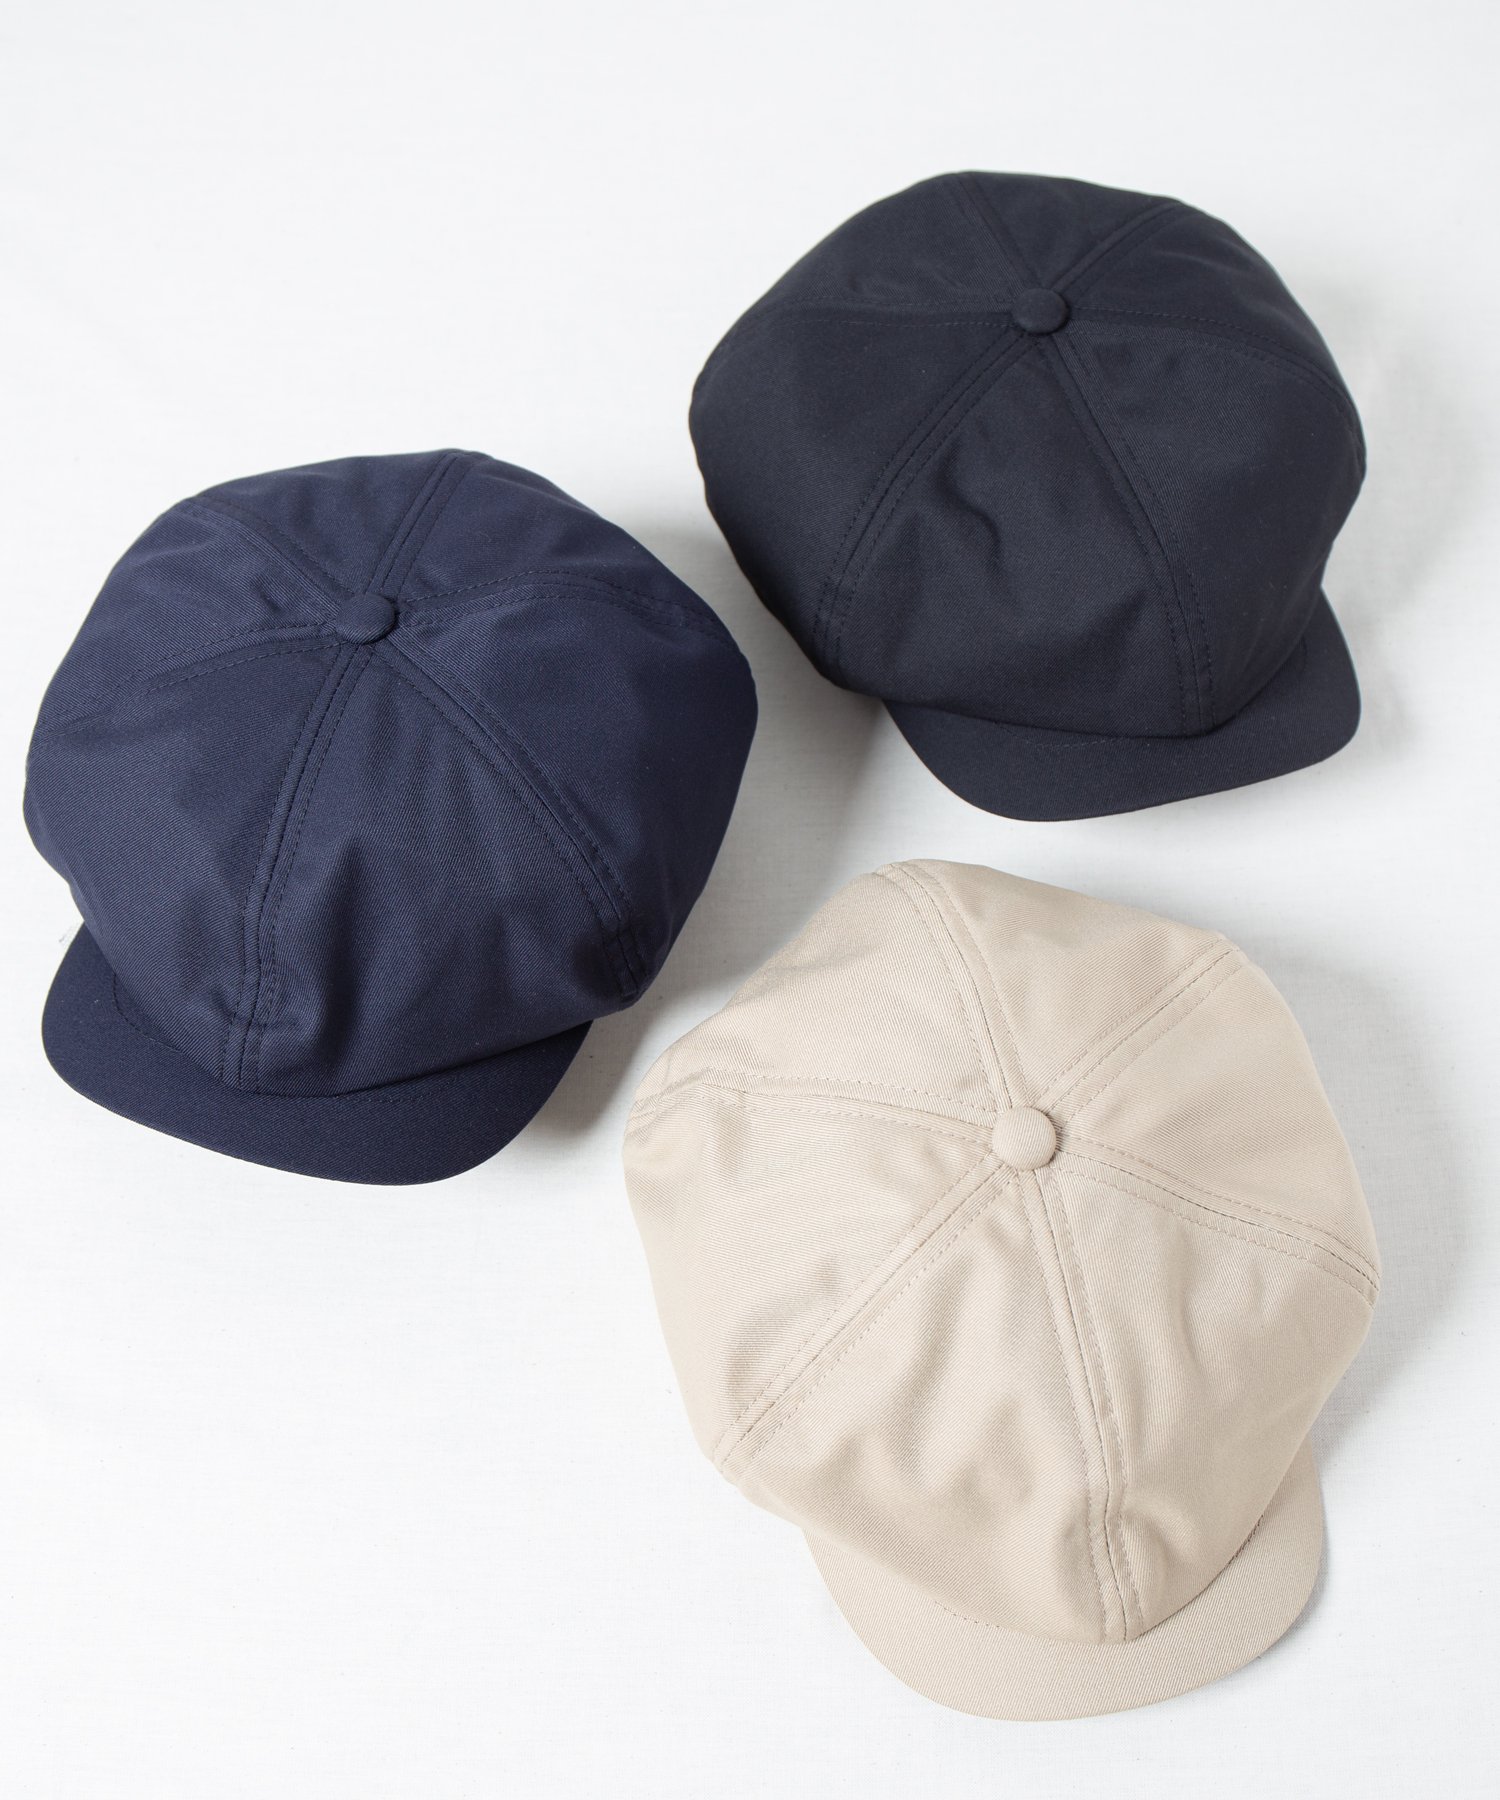 <img class='new_mark_img1' src='https://img.shop-pro.jp/img/new/icons20.gif' style='border:none;display:inline;margin:0px;padding:0px;width:auto;' />【Racal】 Recycle Polyester Blend Twill News Boy Cap / リサイクルポリブレンドツイルニュースボーイキャップ